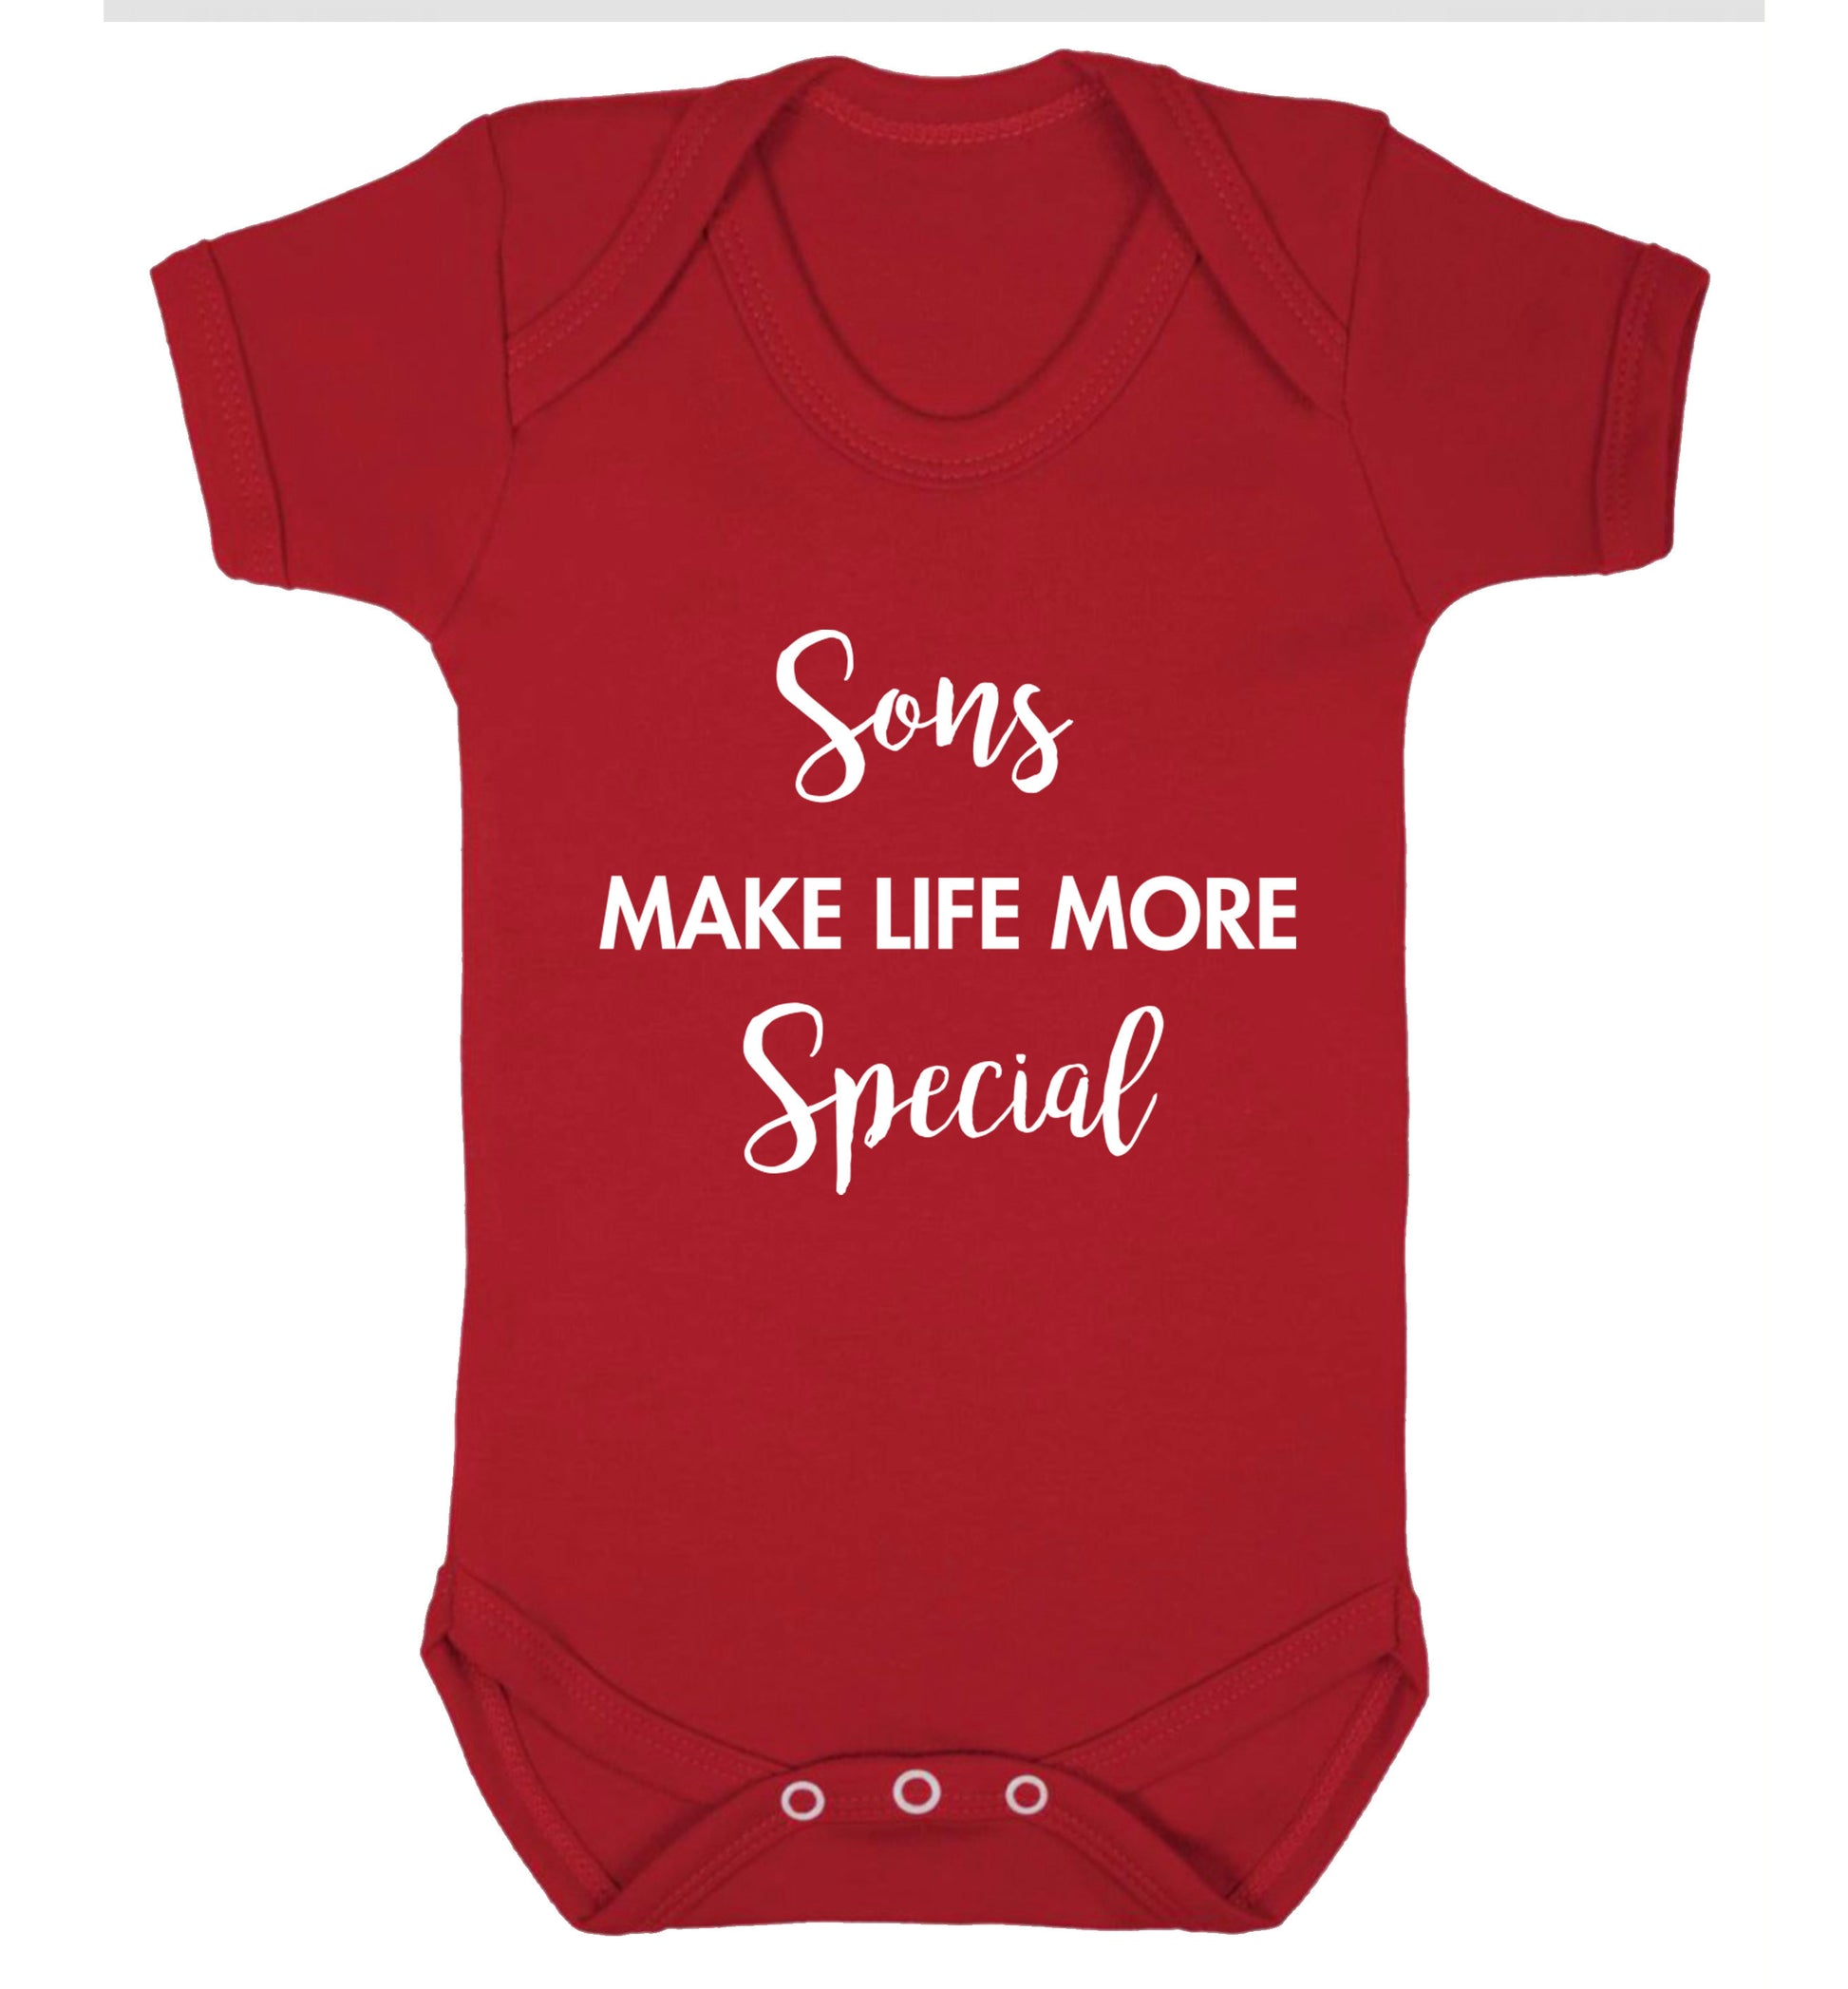 Sons make life more special Baby Vest red 18-24 months